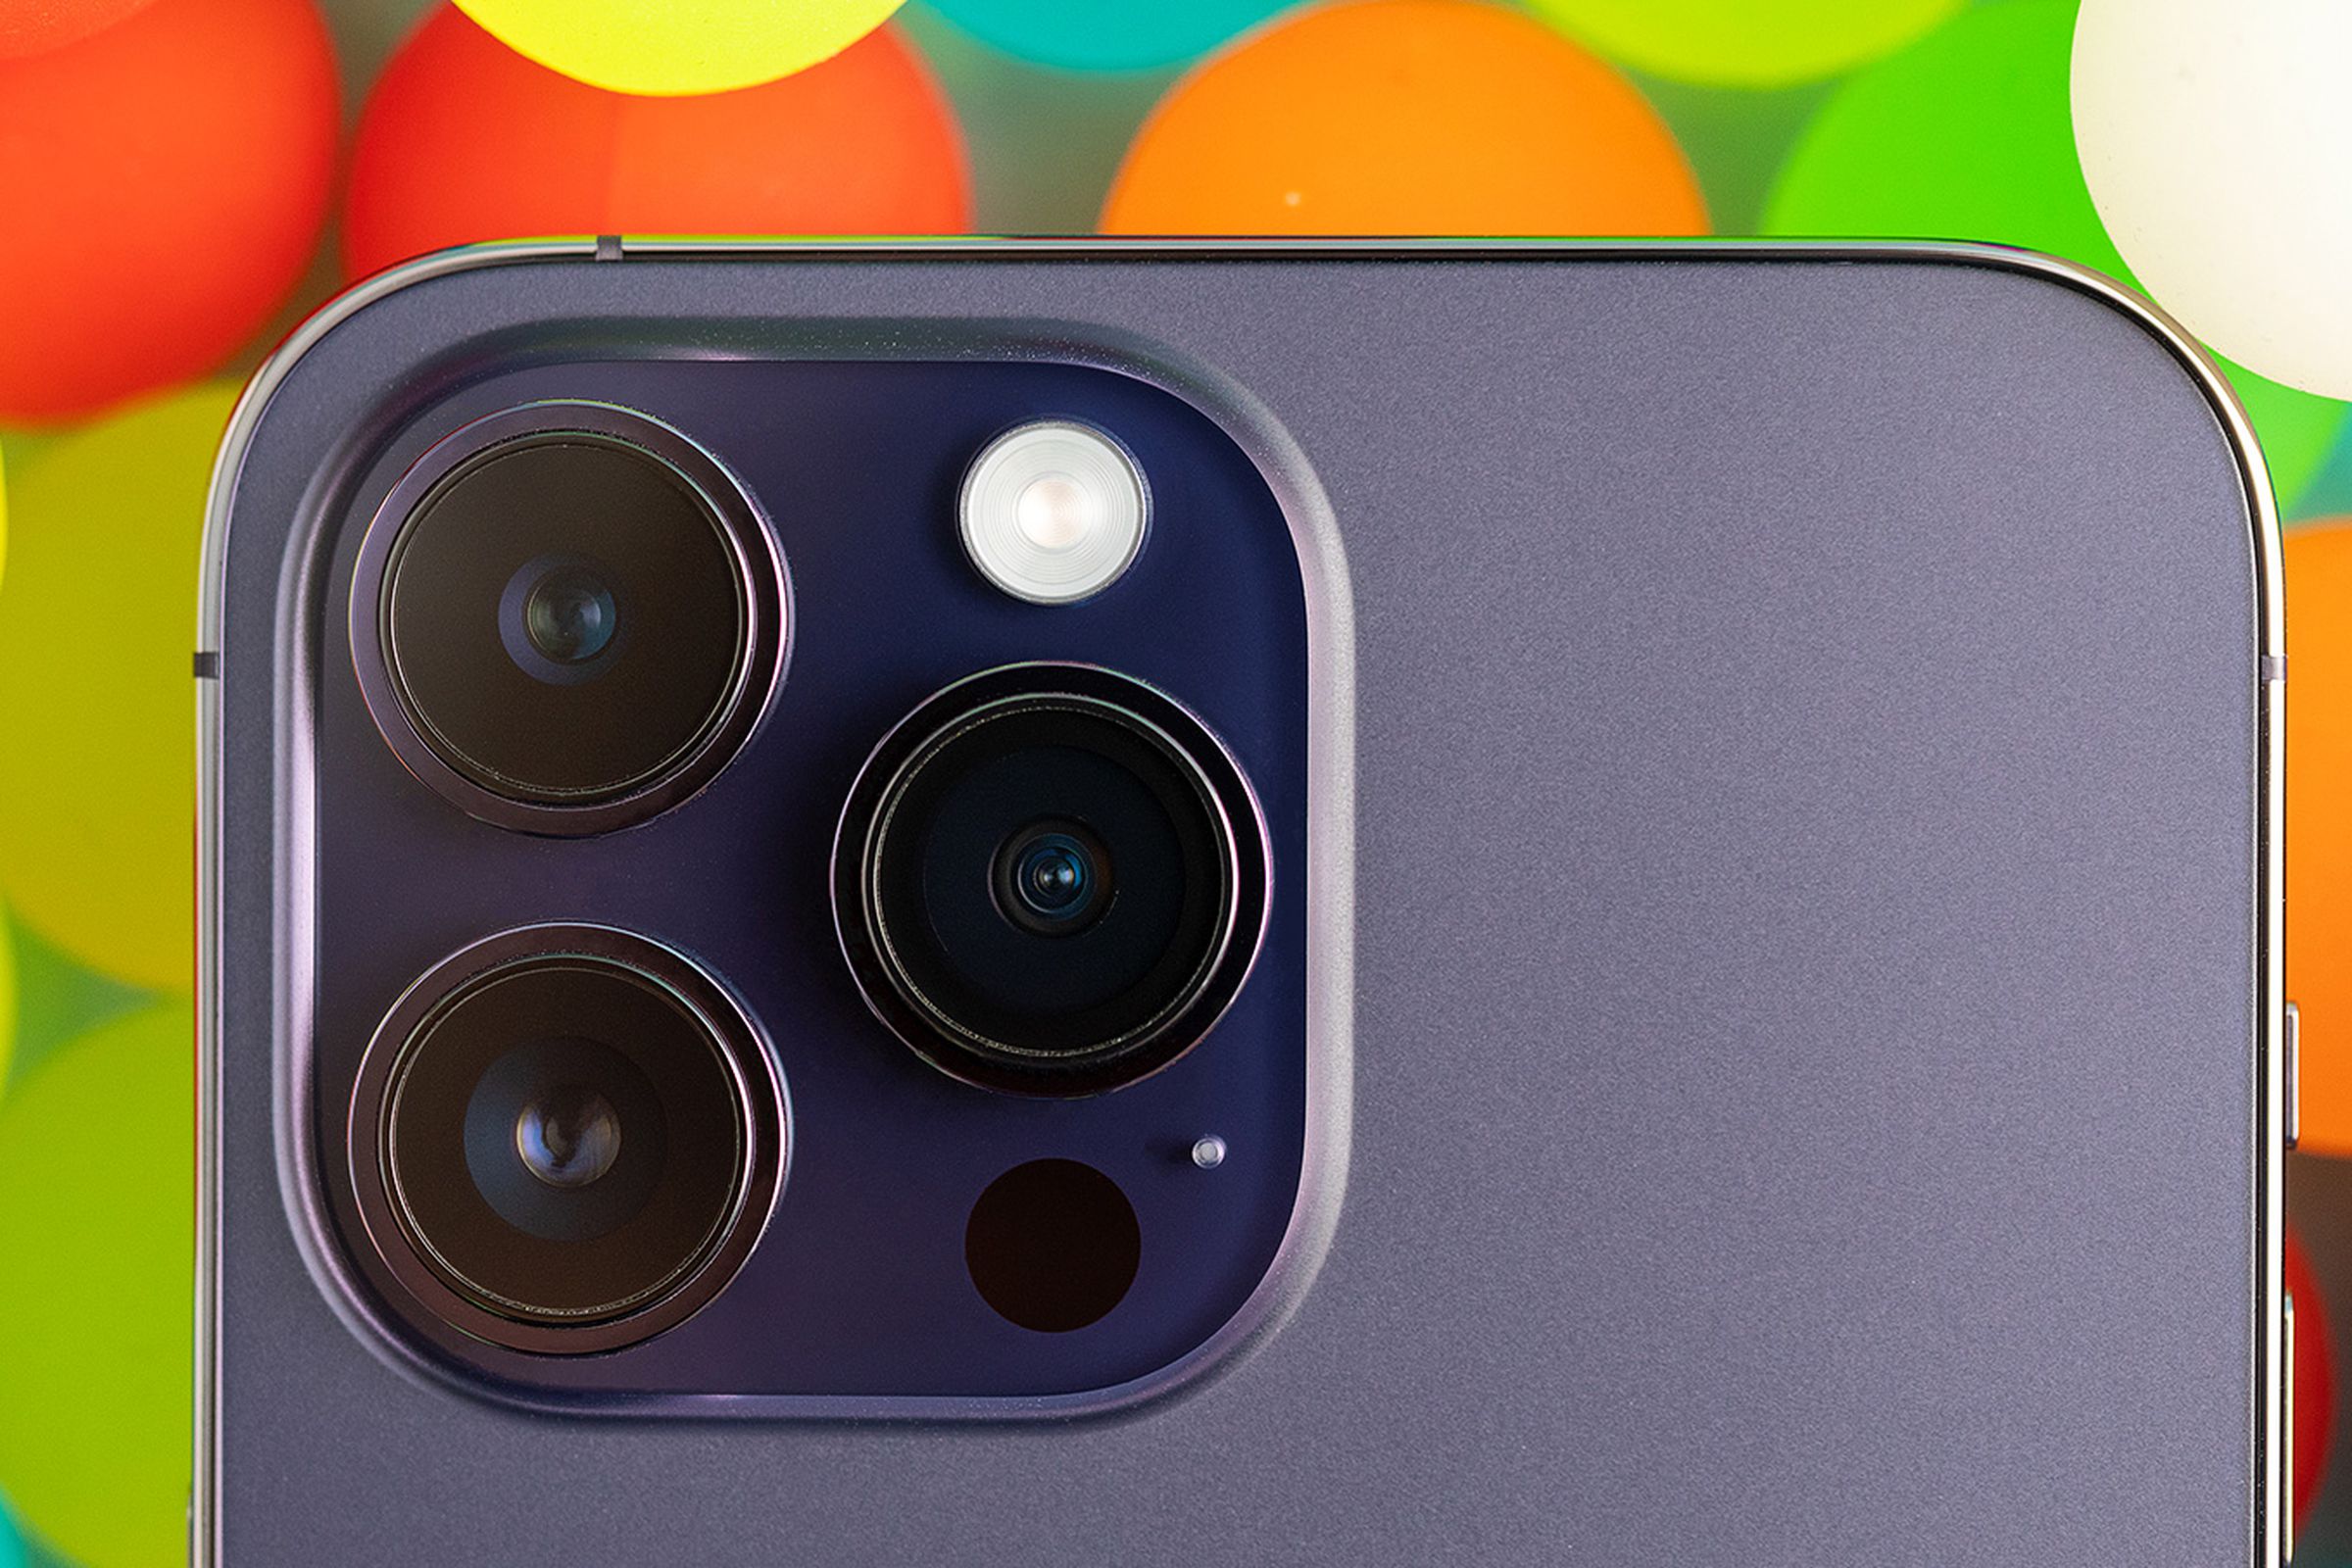 A close up image of the iPhone 14 Pro’s camera module on a background of translucent colorful balls.